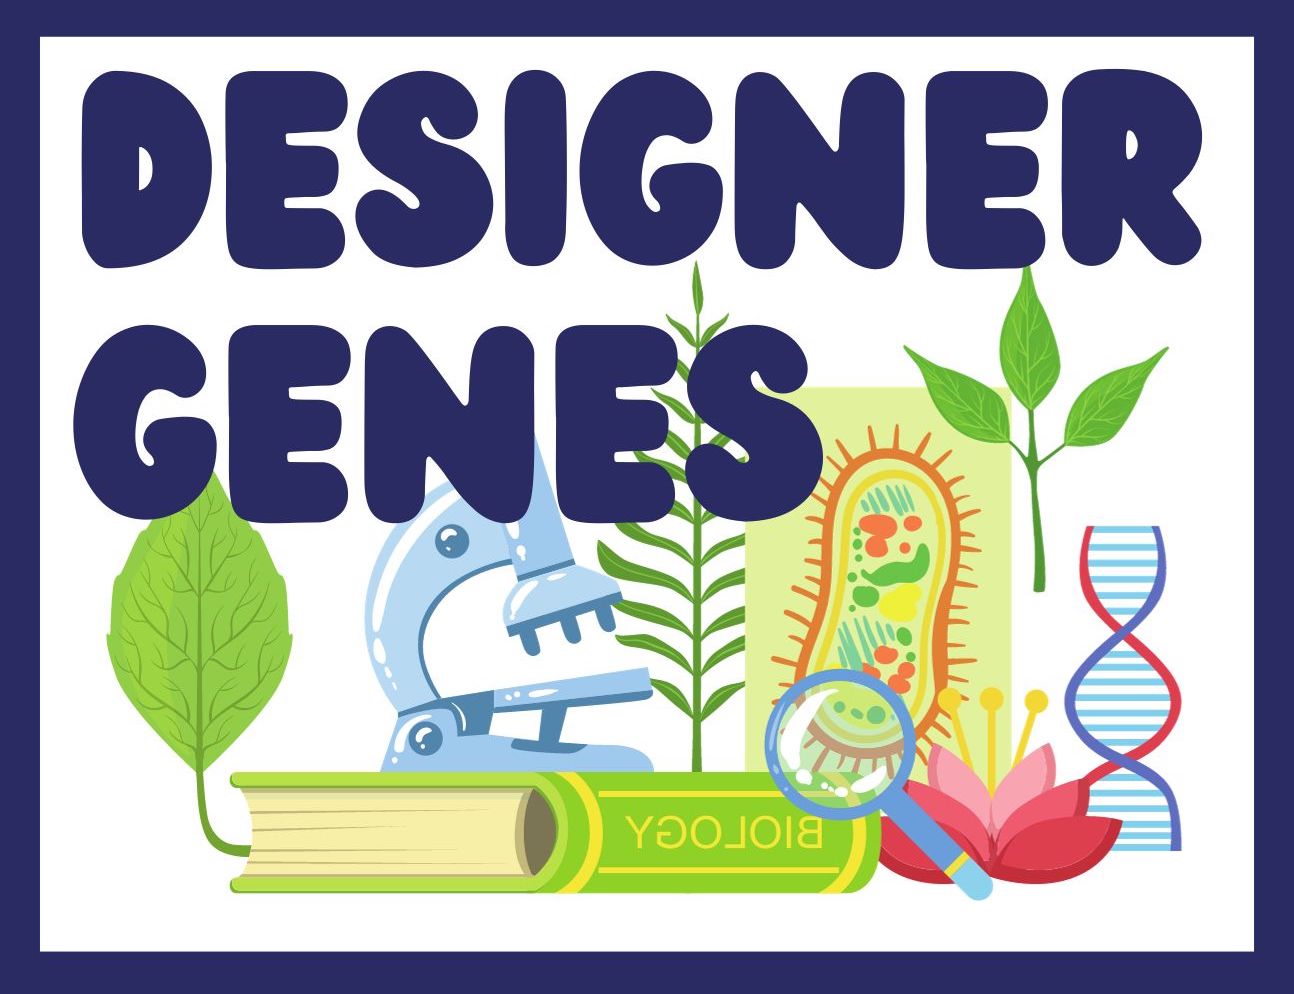 Text: Designer Genes, image: blue background, images of plants, a book, a microscope, a magnifying glass, DNA strand, and cell diagram